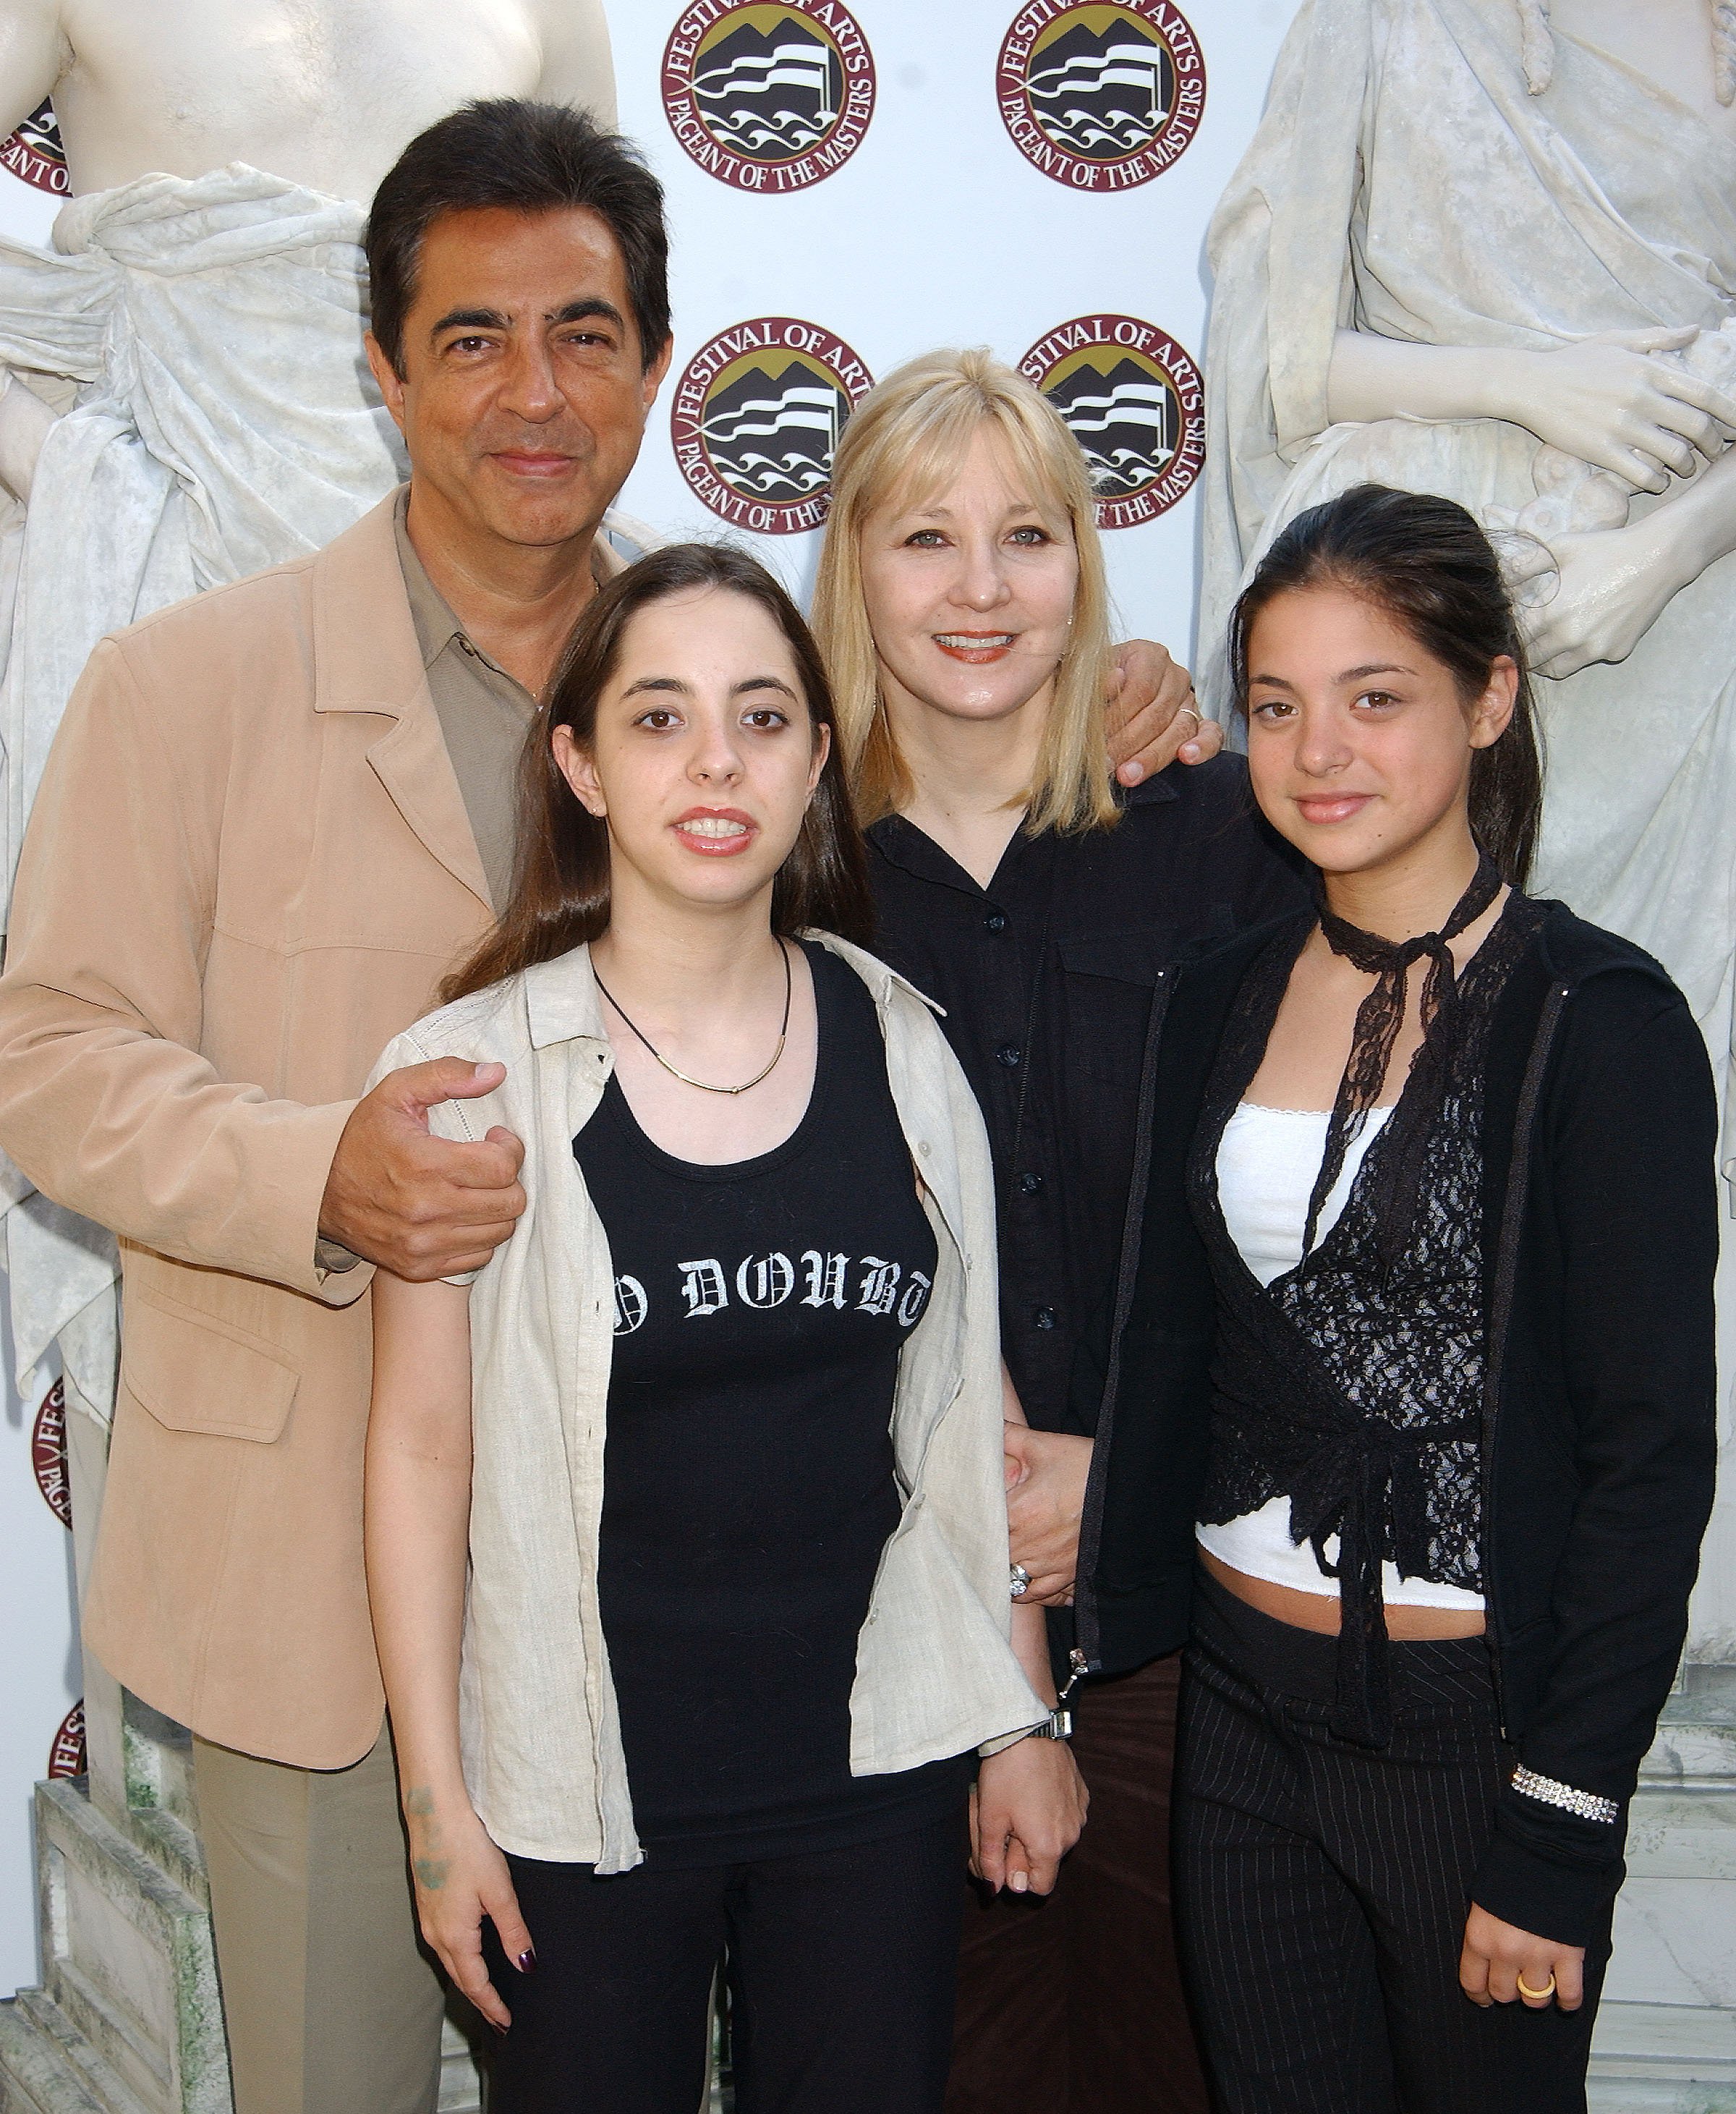 Joe Mantegna, wife Arlene Vrhel and daughters Mia and Gia Mantegna at the The Festival of Arts in Laguna Beach, California, 2017 | Source: Getty Images